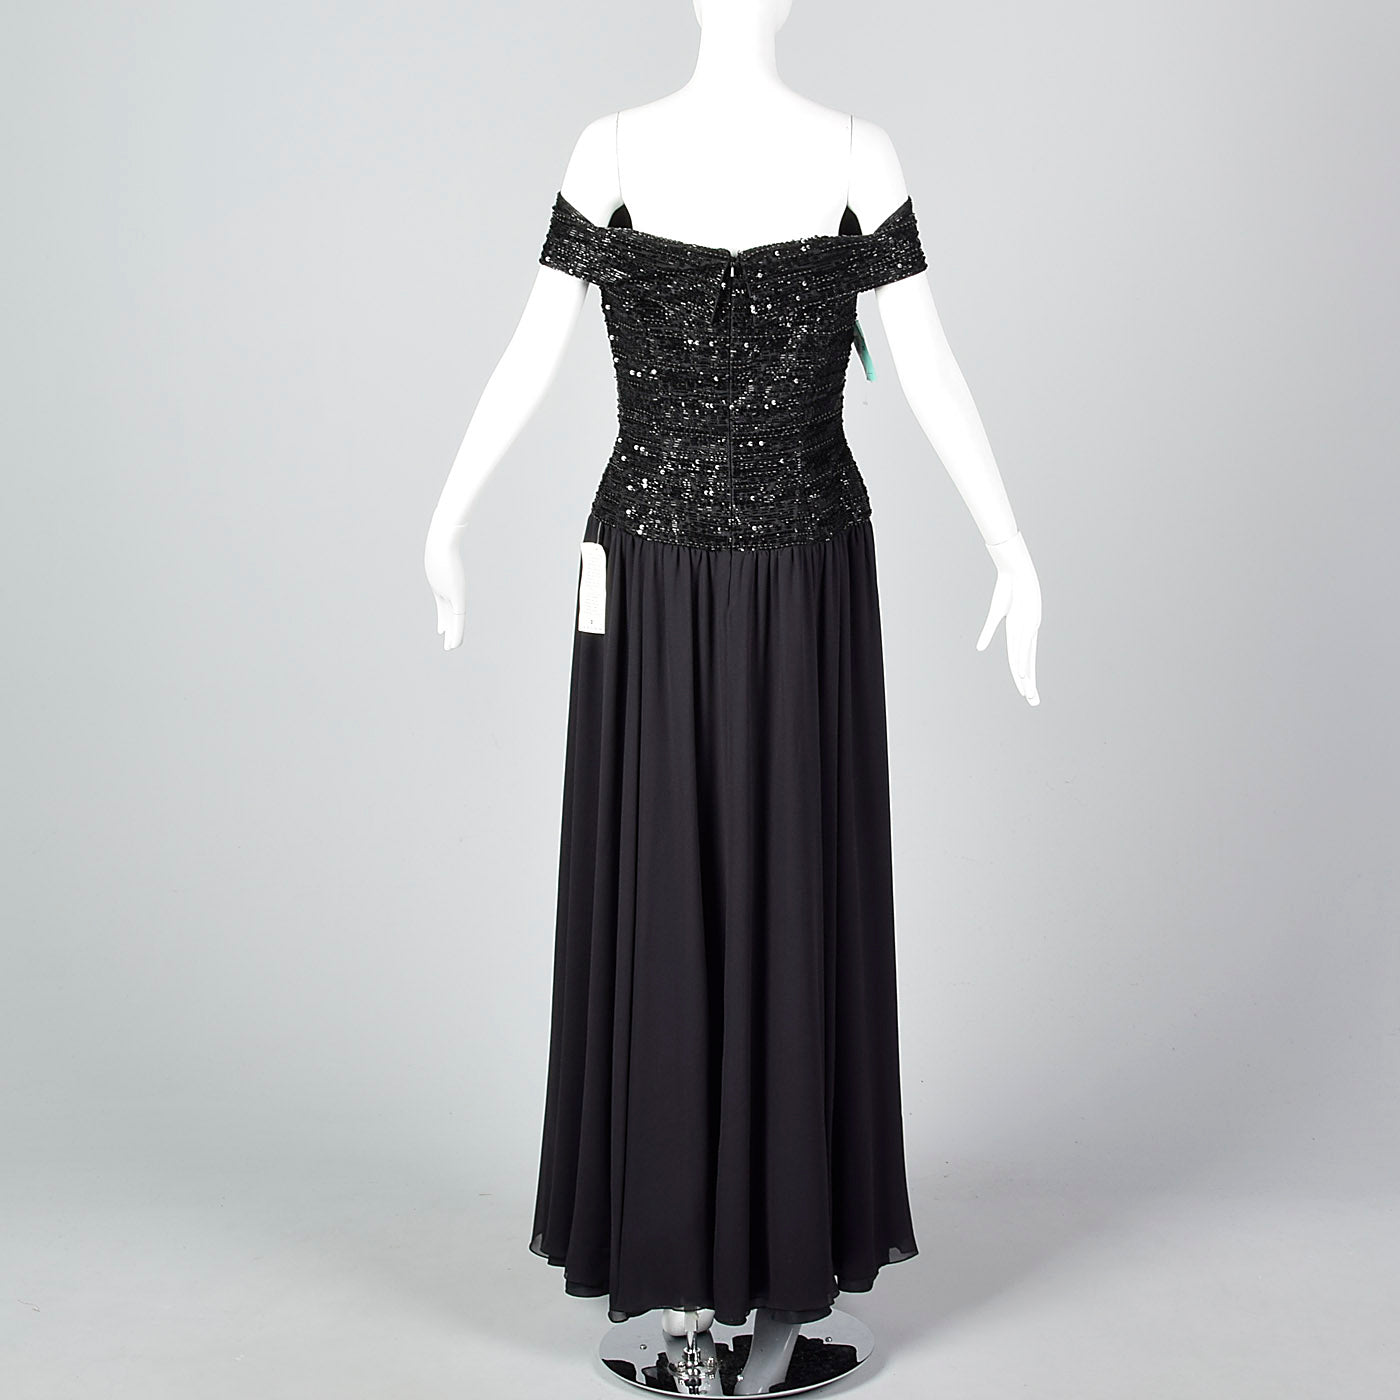 Off Shoulder Oleg Cassini Black Tie Formal Gown with Beaded Bodice and Full Skirt